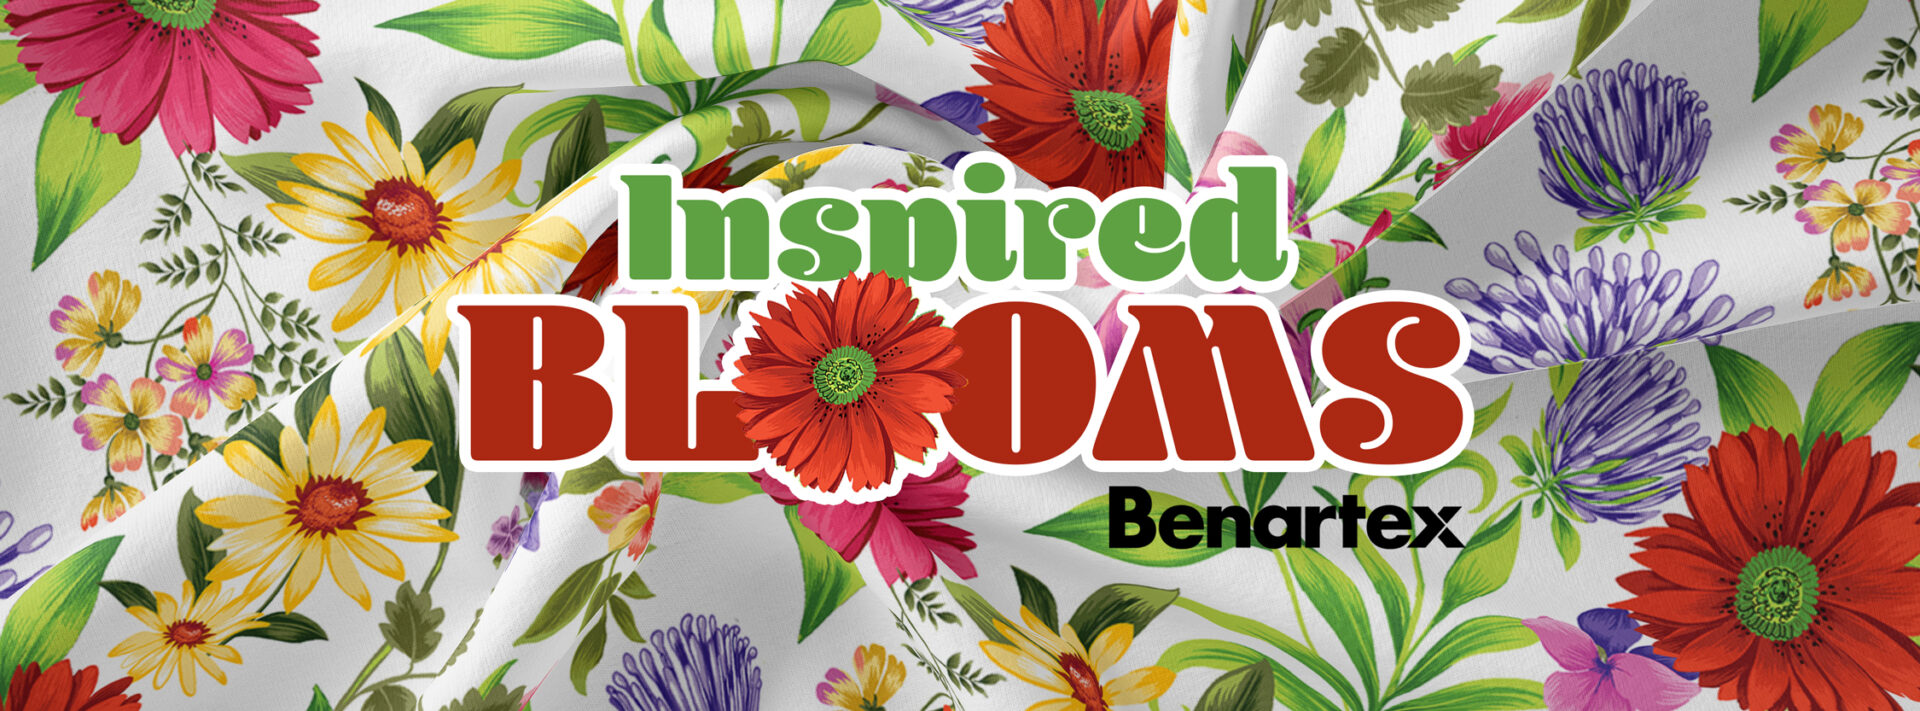 Inspired Blooms Banner